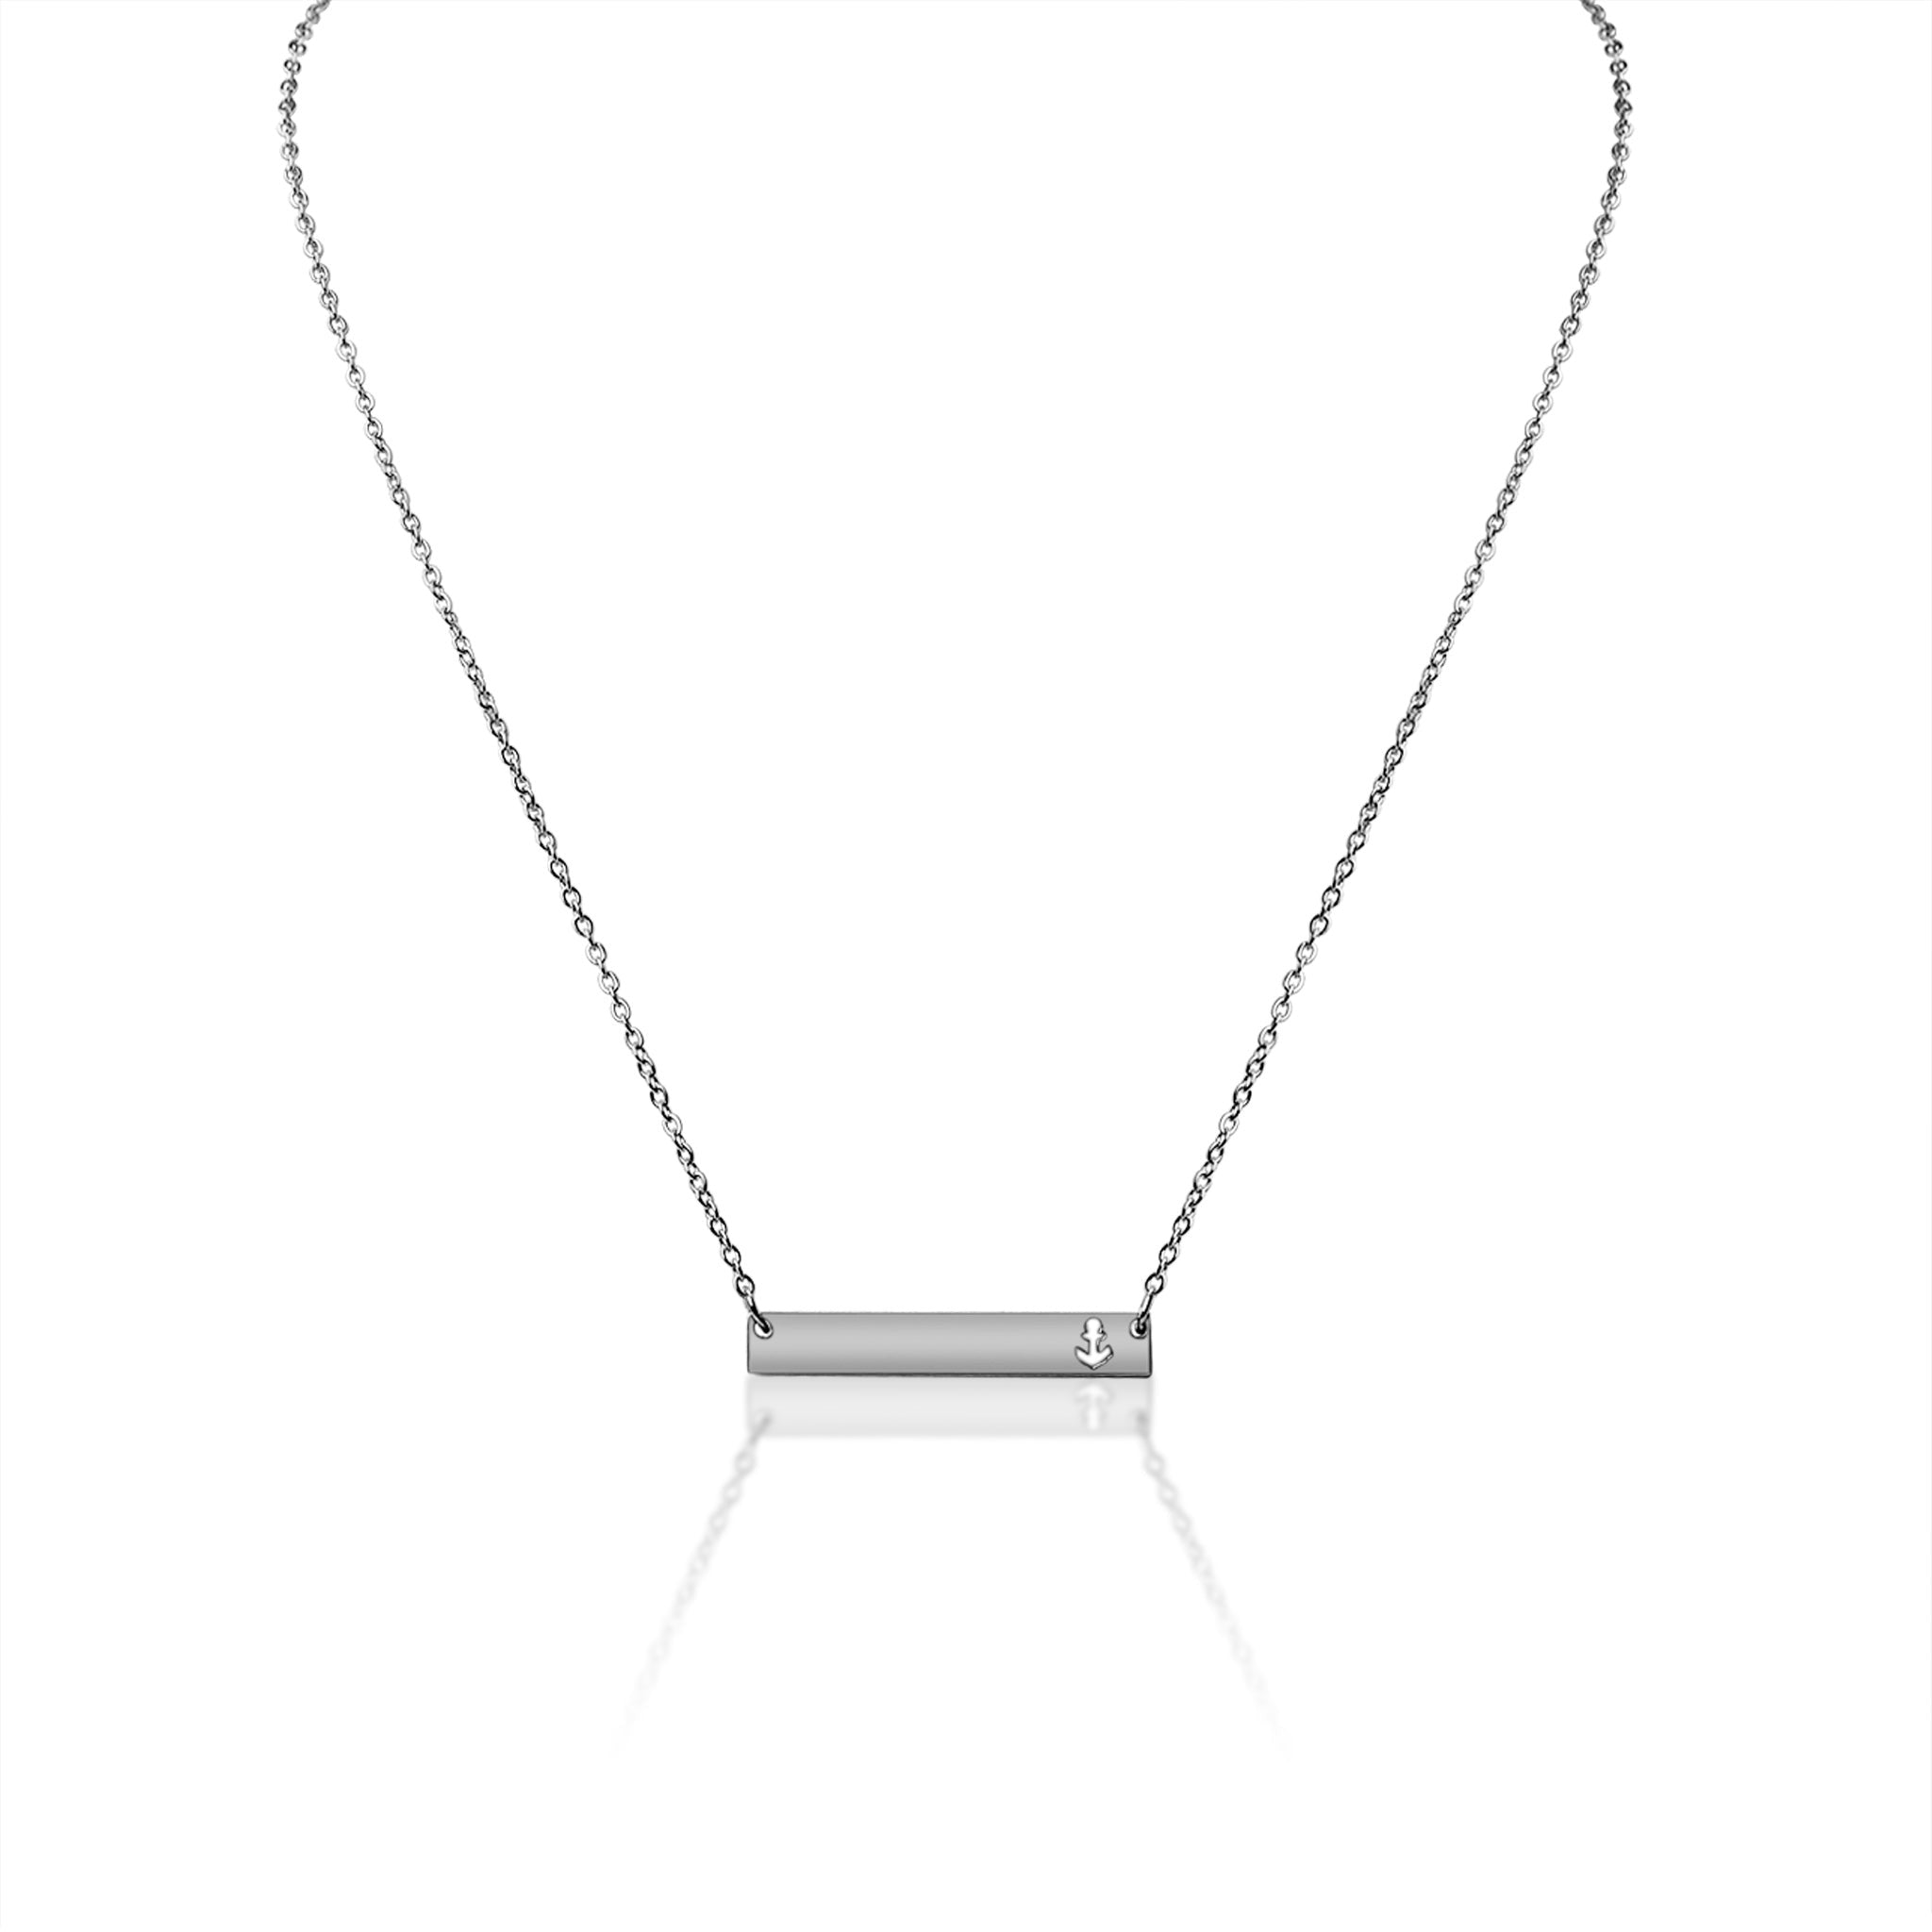 Anchor Cutout Horizontal Stainless Steel Bar Necklace